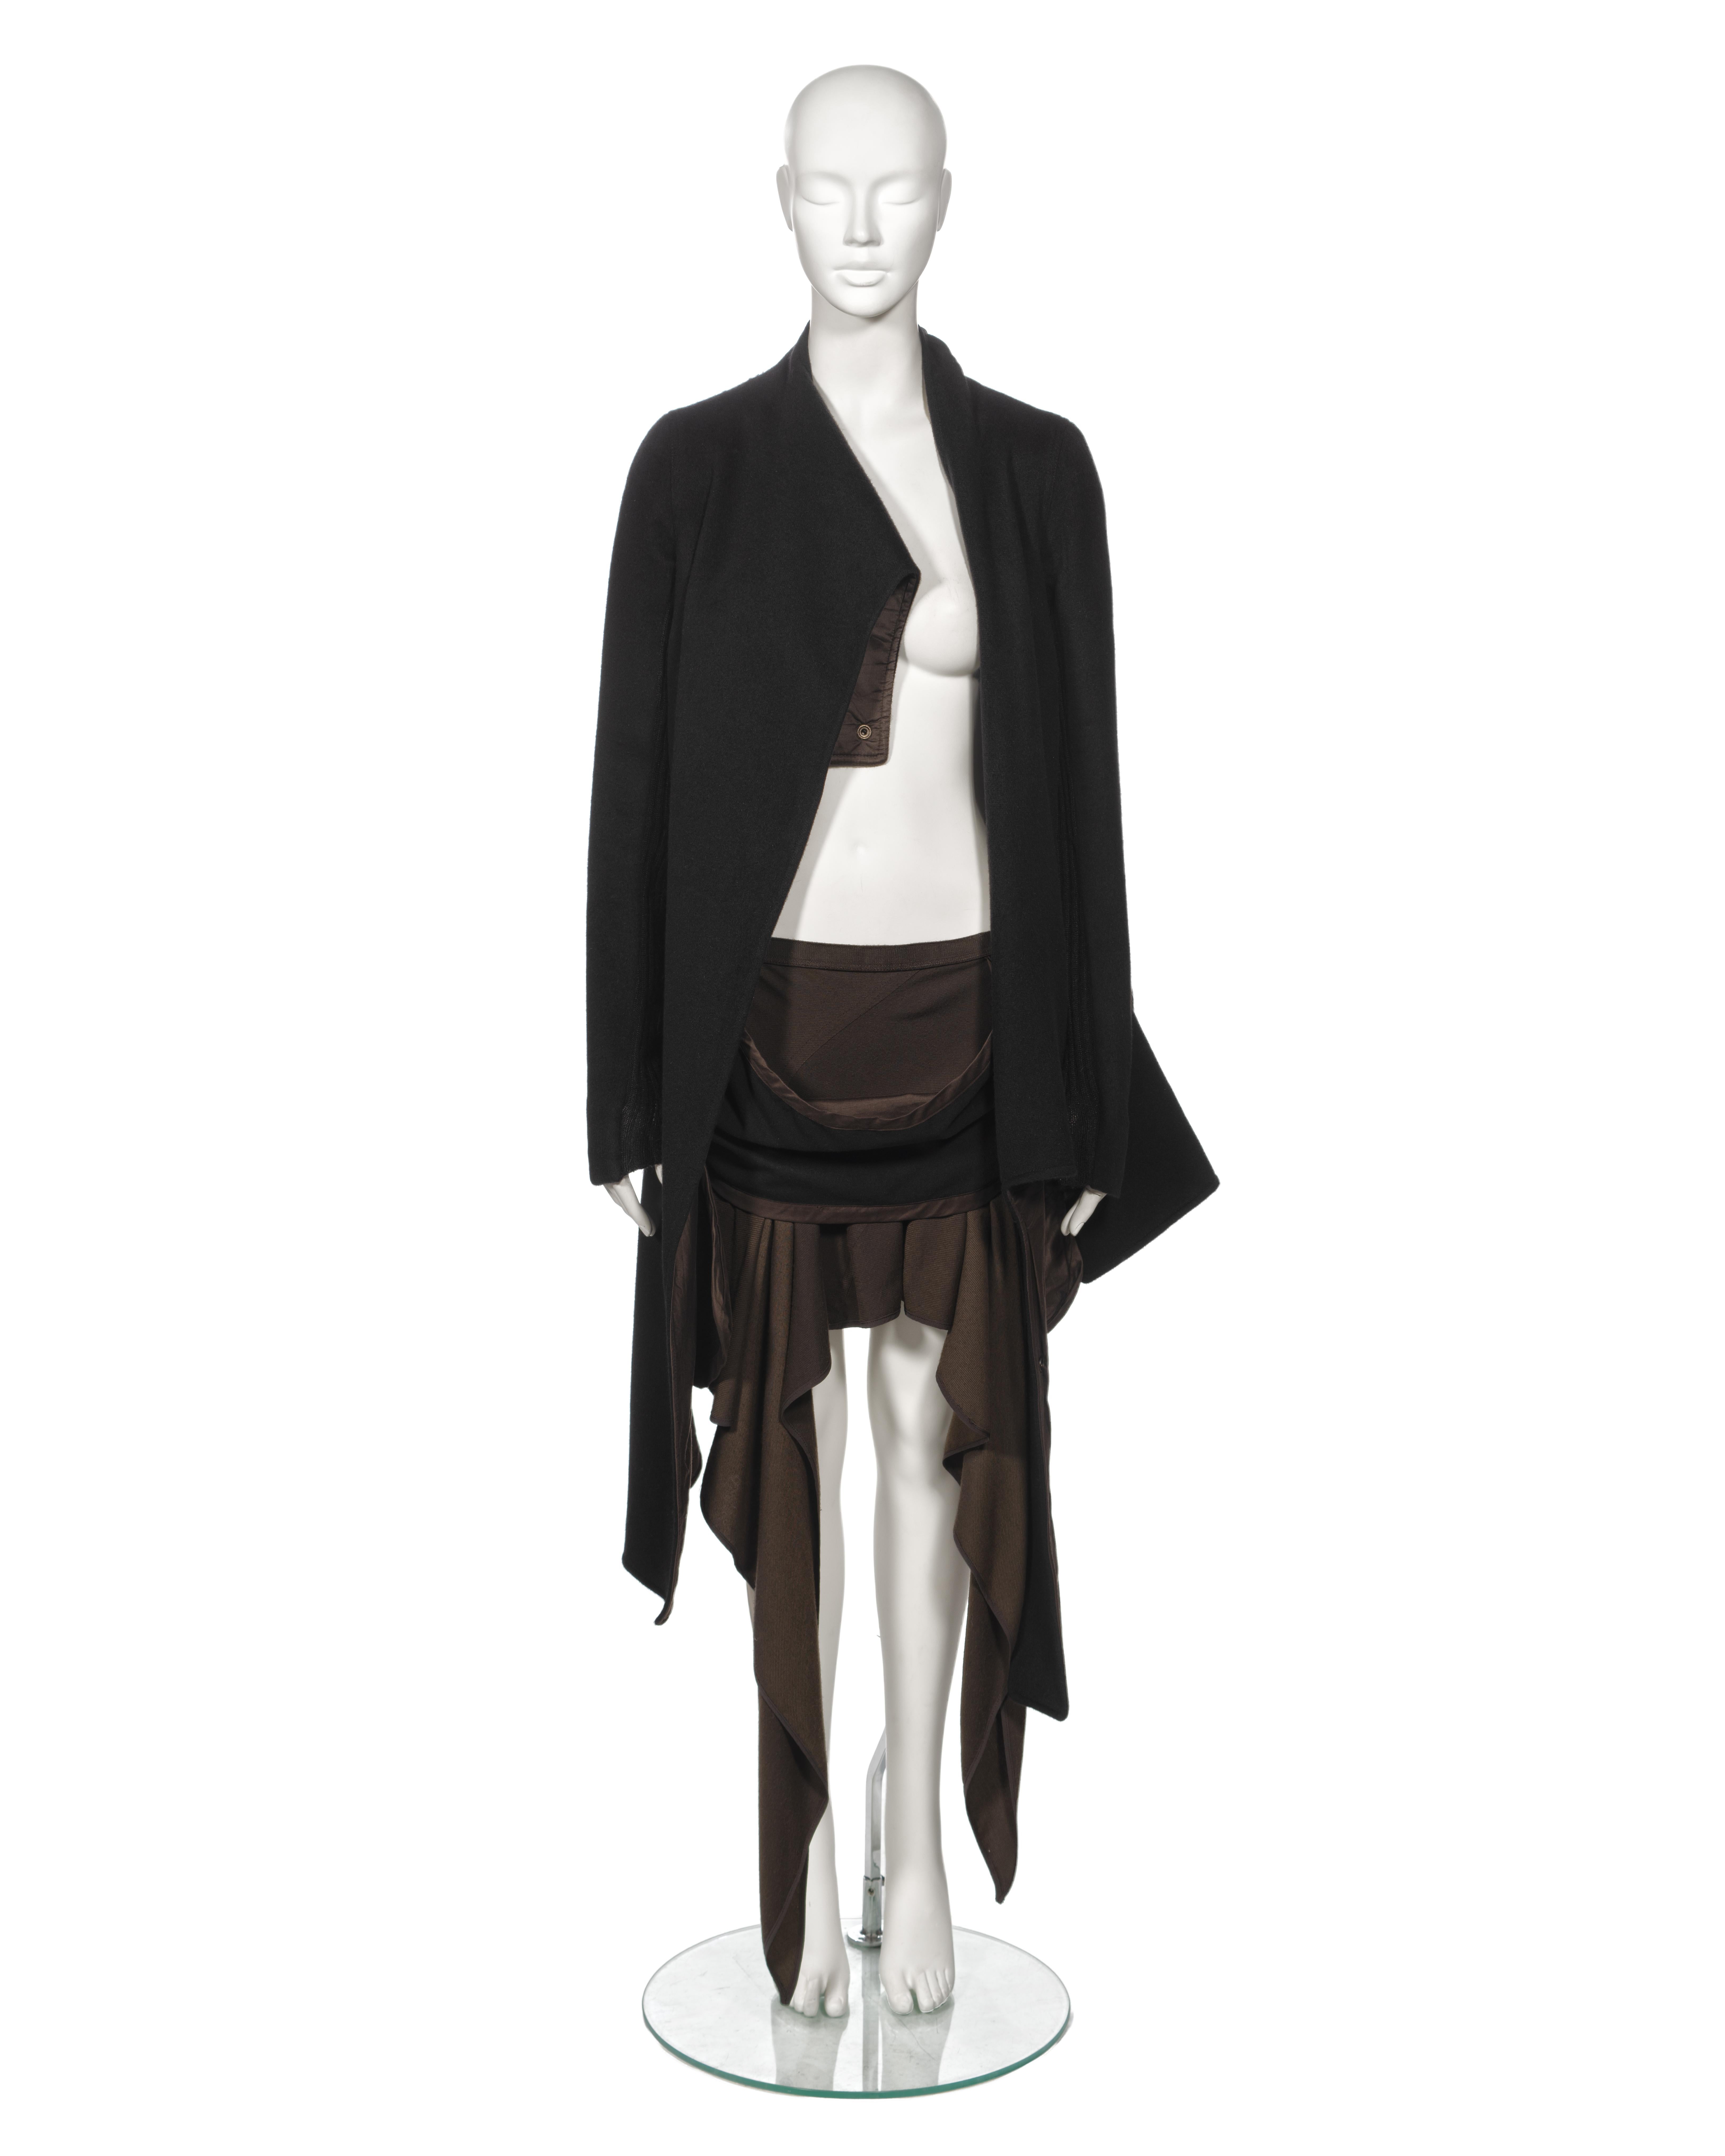 ▪ Archival Rick Owens 'Queen' Ensemble
▪ Fall-Winter 2004
▪ Asymmetric cut jacket fashioned from black Angora fabric
▪ Showcases a scarf-like attachment draped across the body, forming a generous cowl and secured at the back with metal press studs
▪